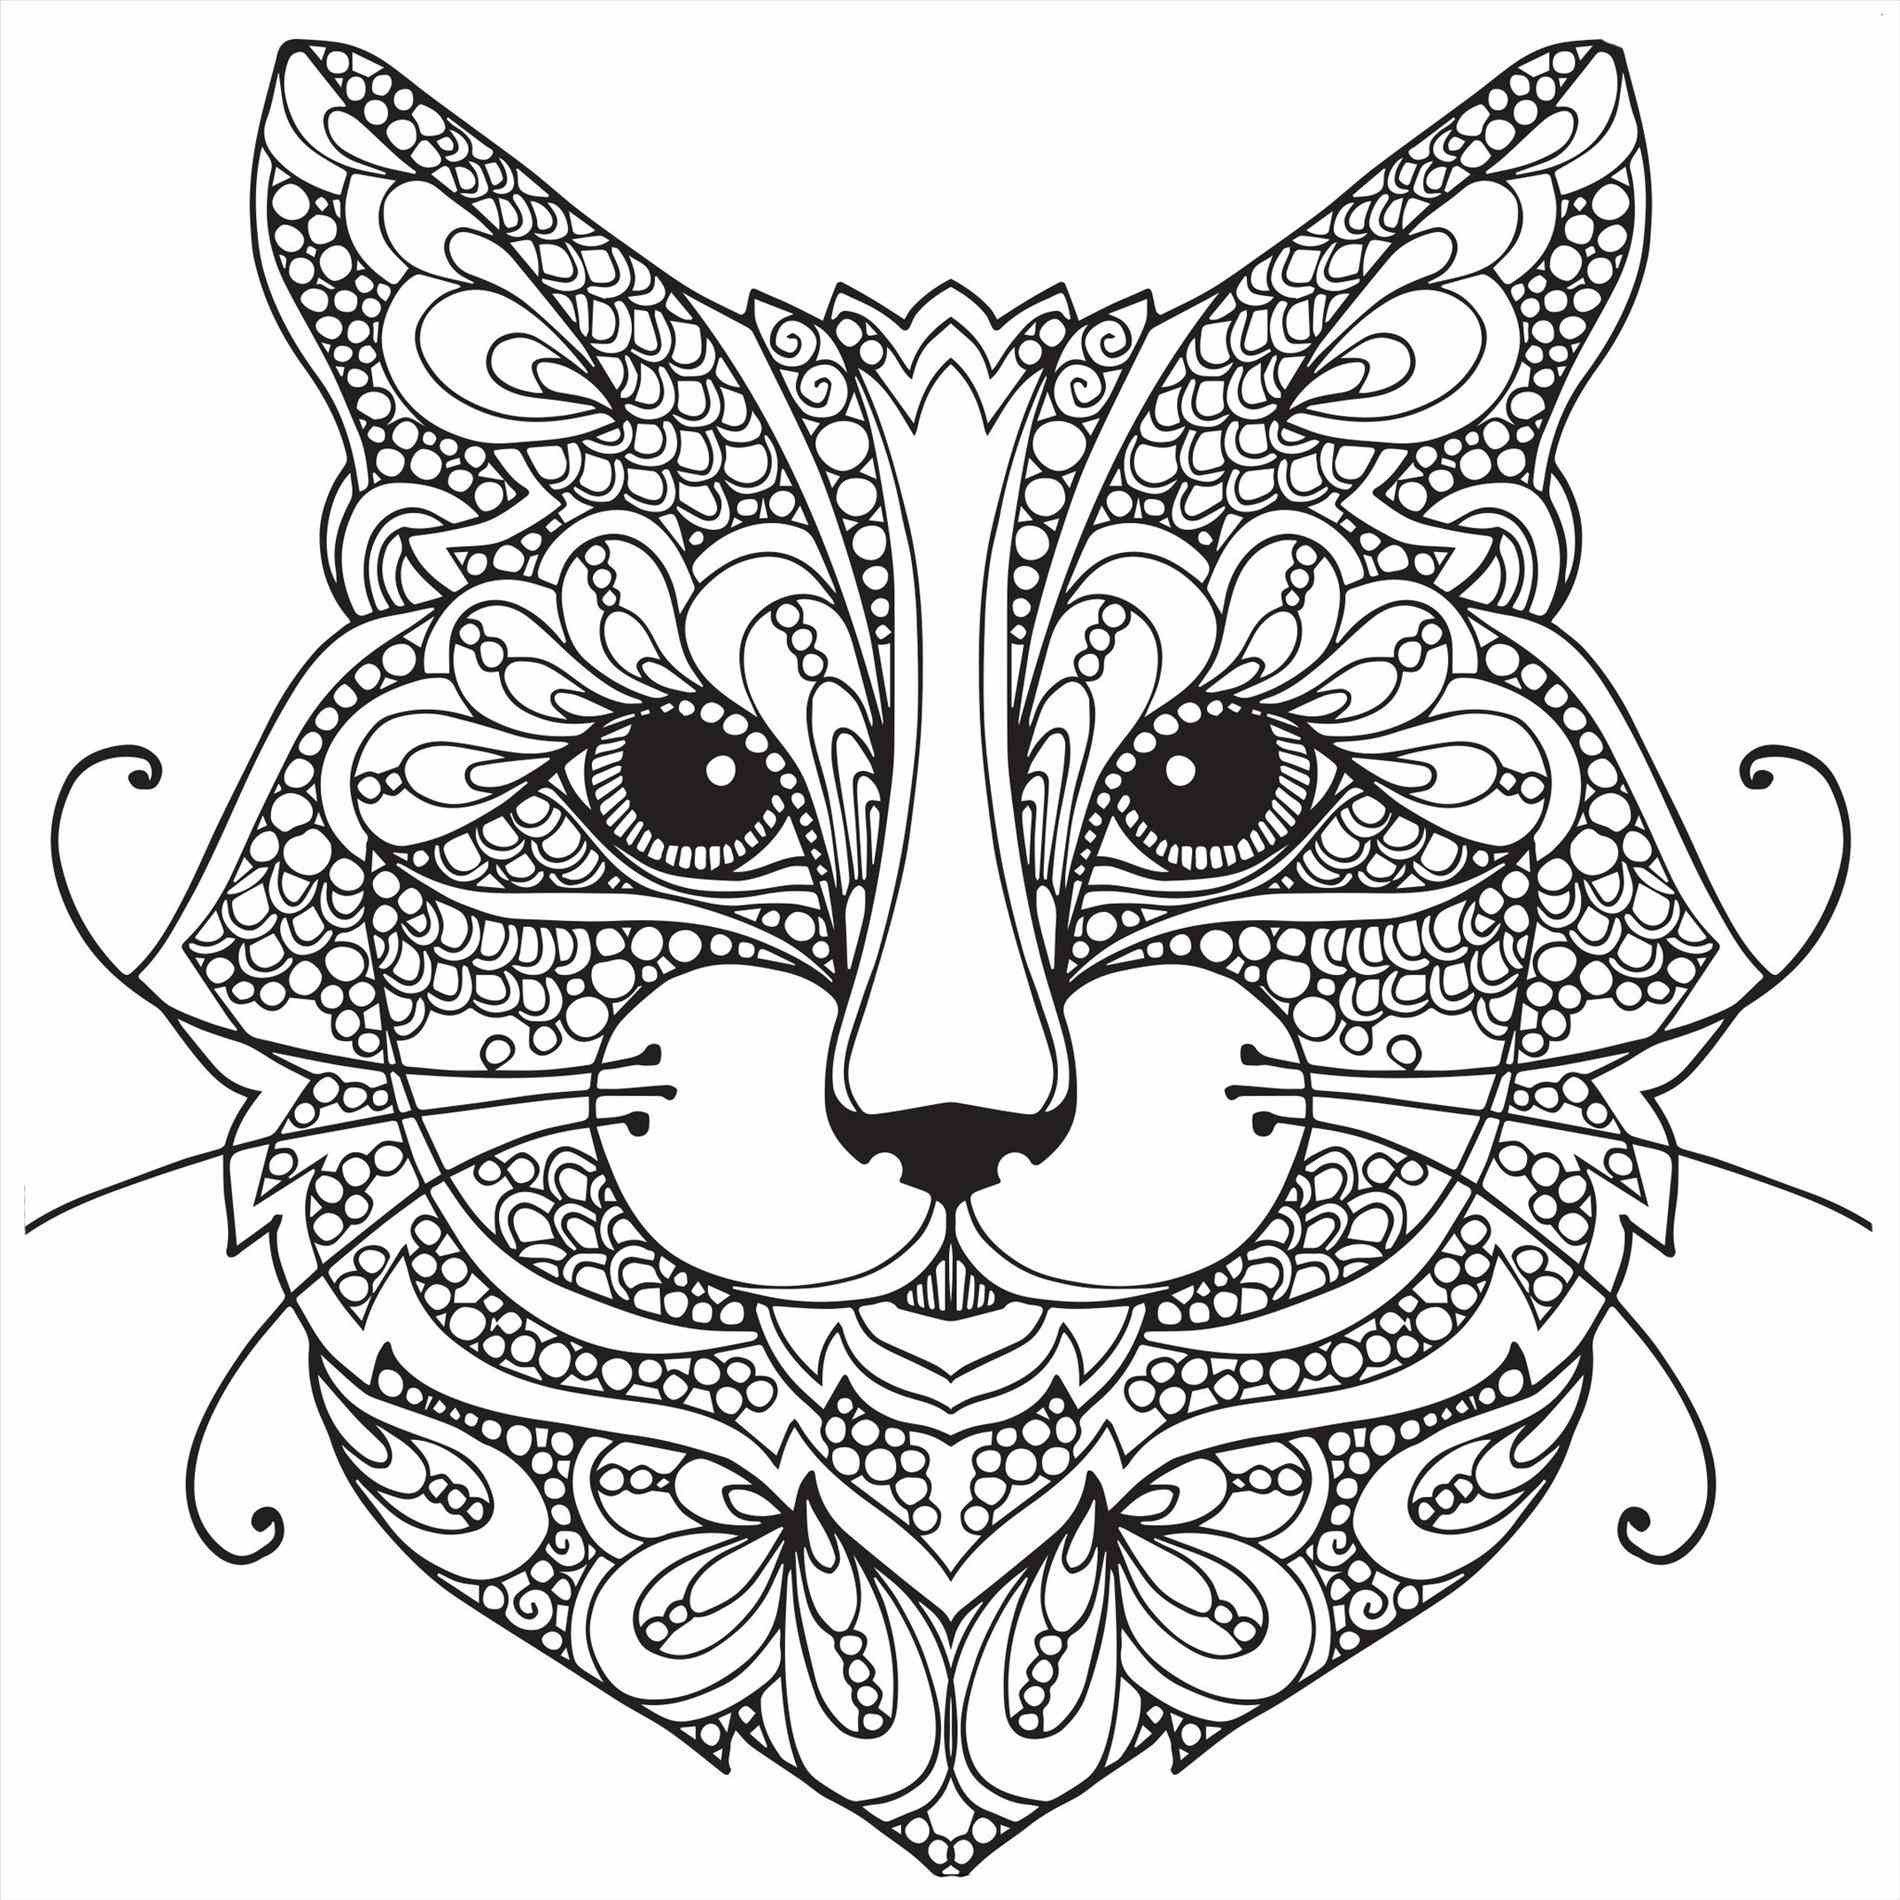 Rag Doll Coloring Page at GetColorings.com | Free printable colorings